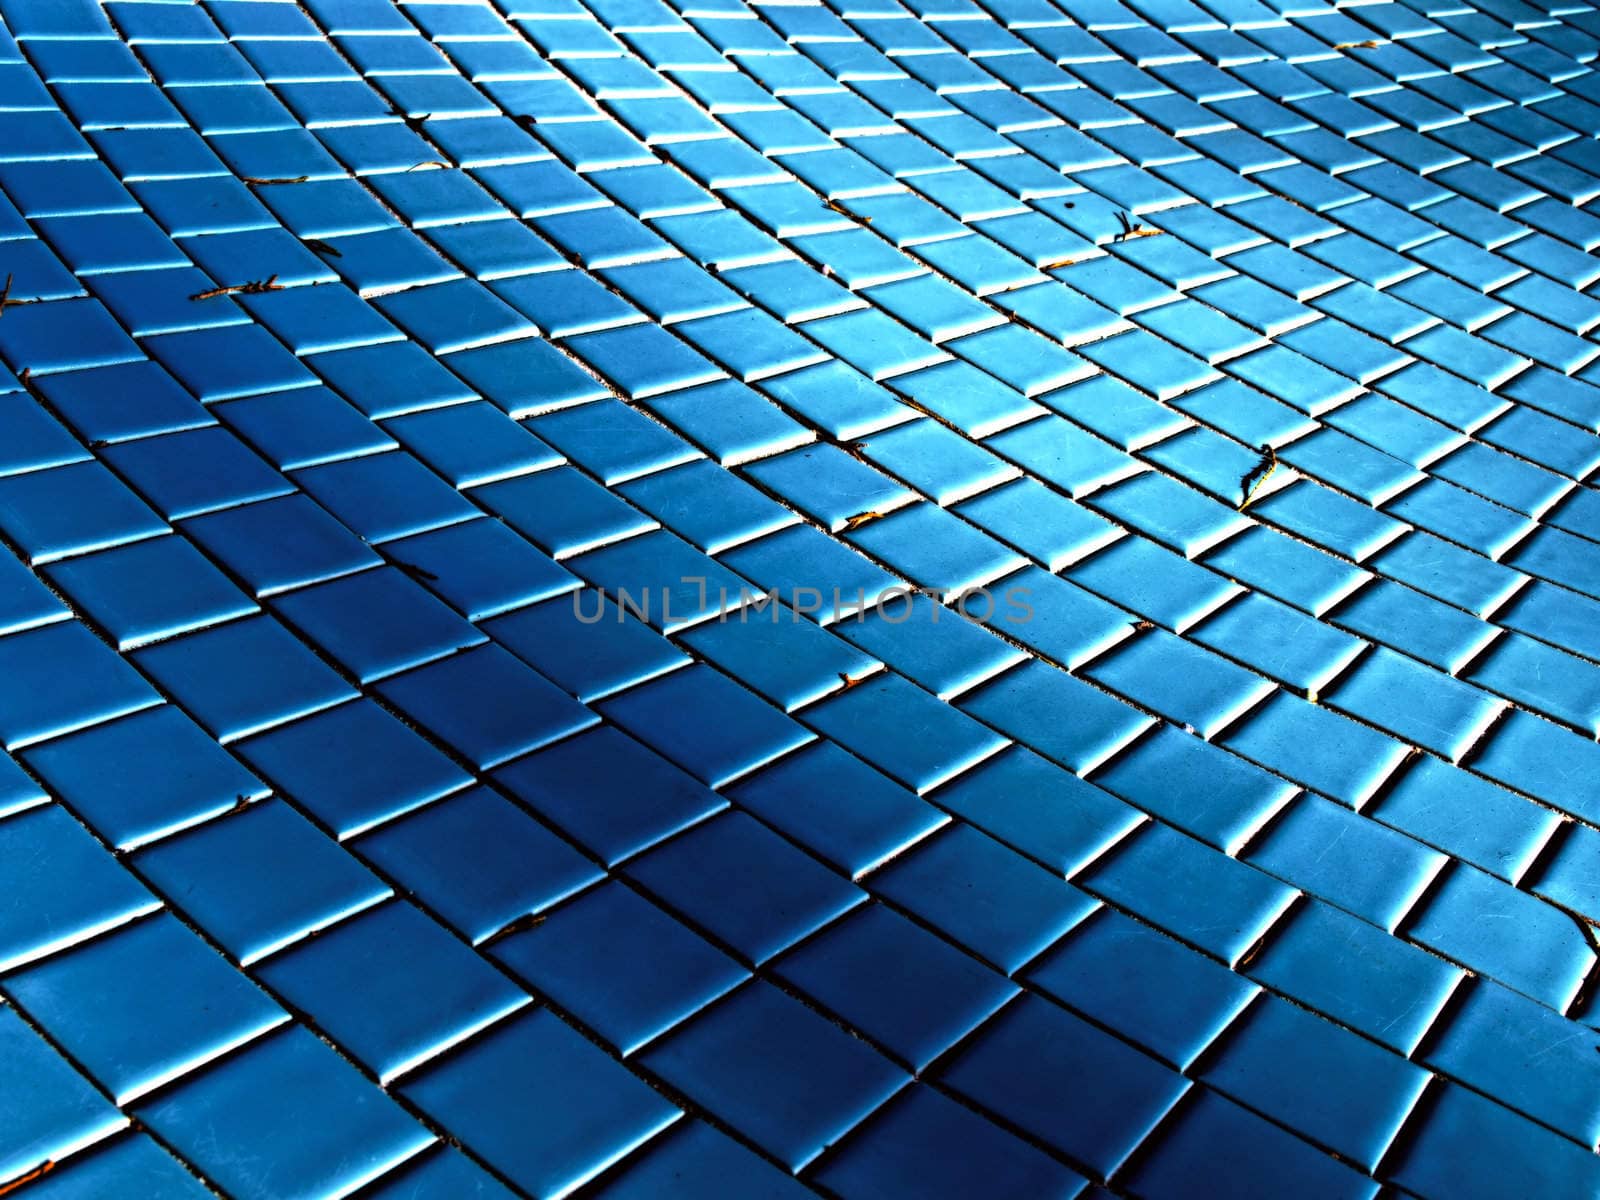 A wave effect created by light and shadow on the tile of a drained pool.